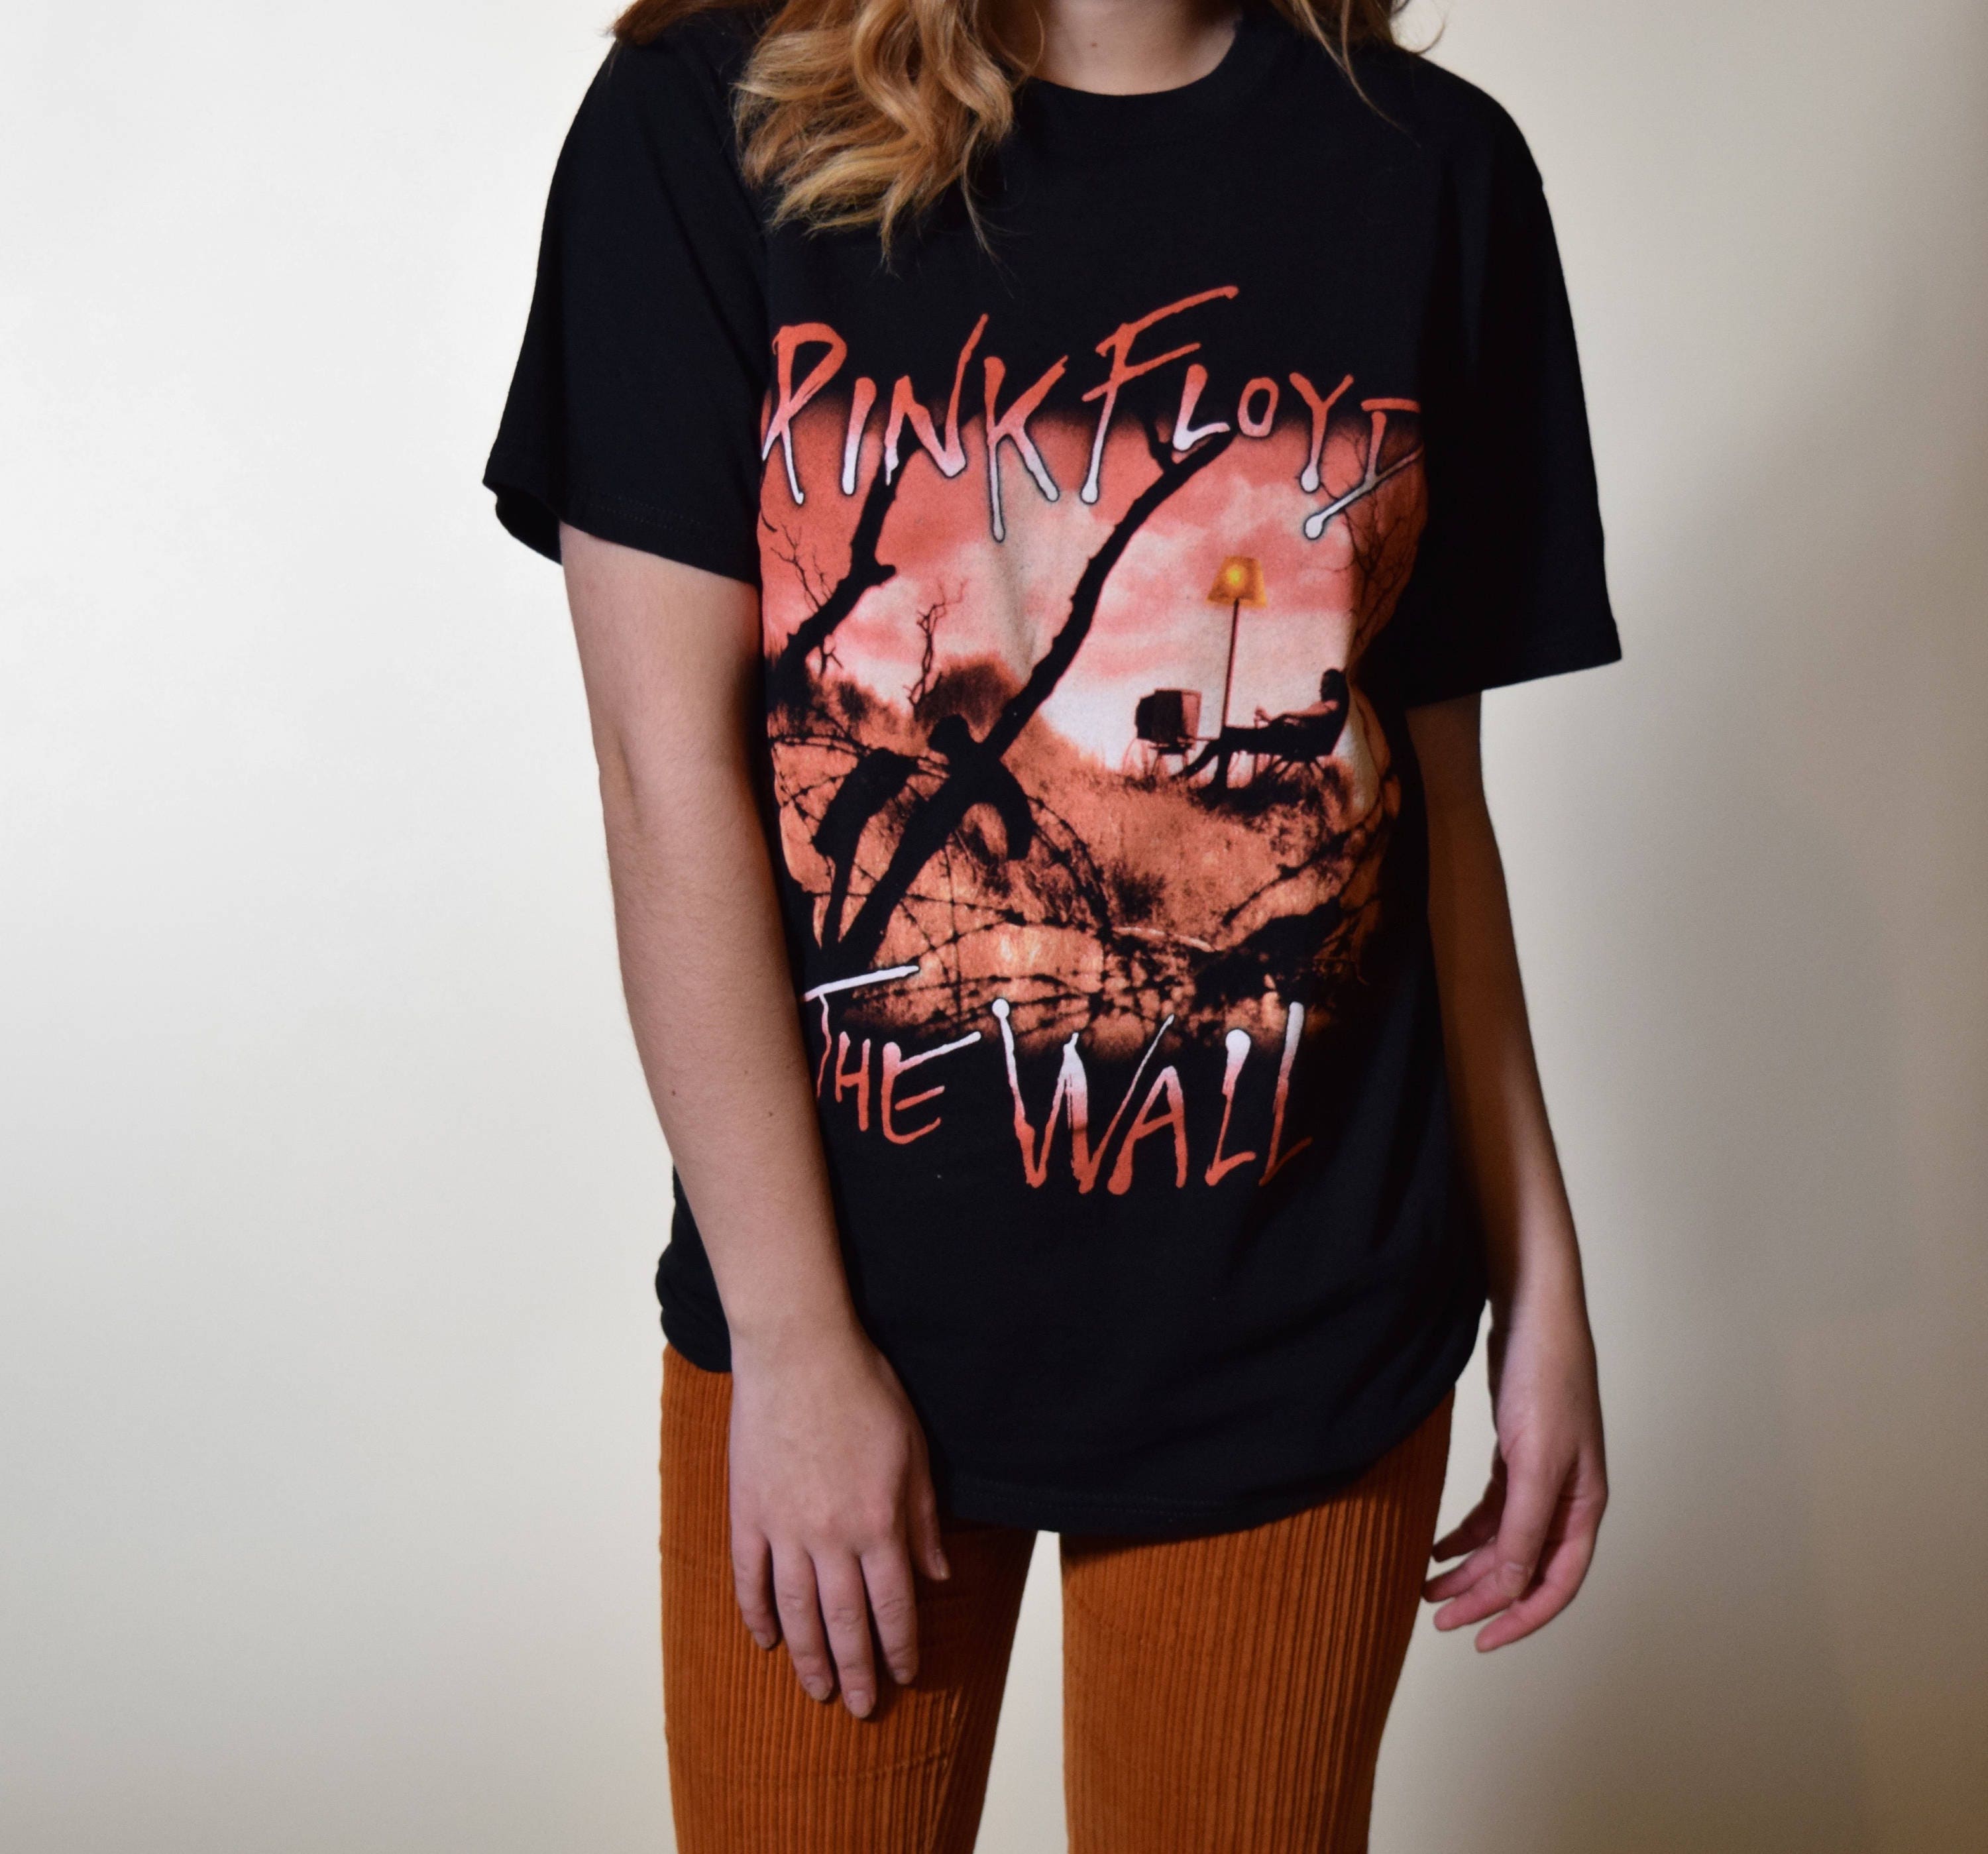 Pink Floyd vintage 90's The Wall band graphic tee shirt unisex small